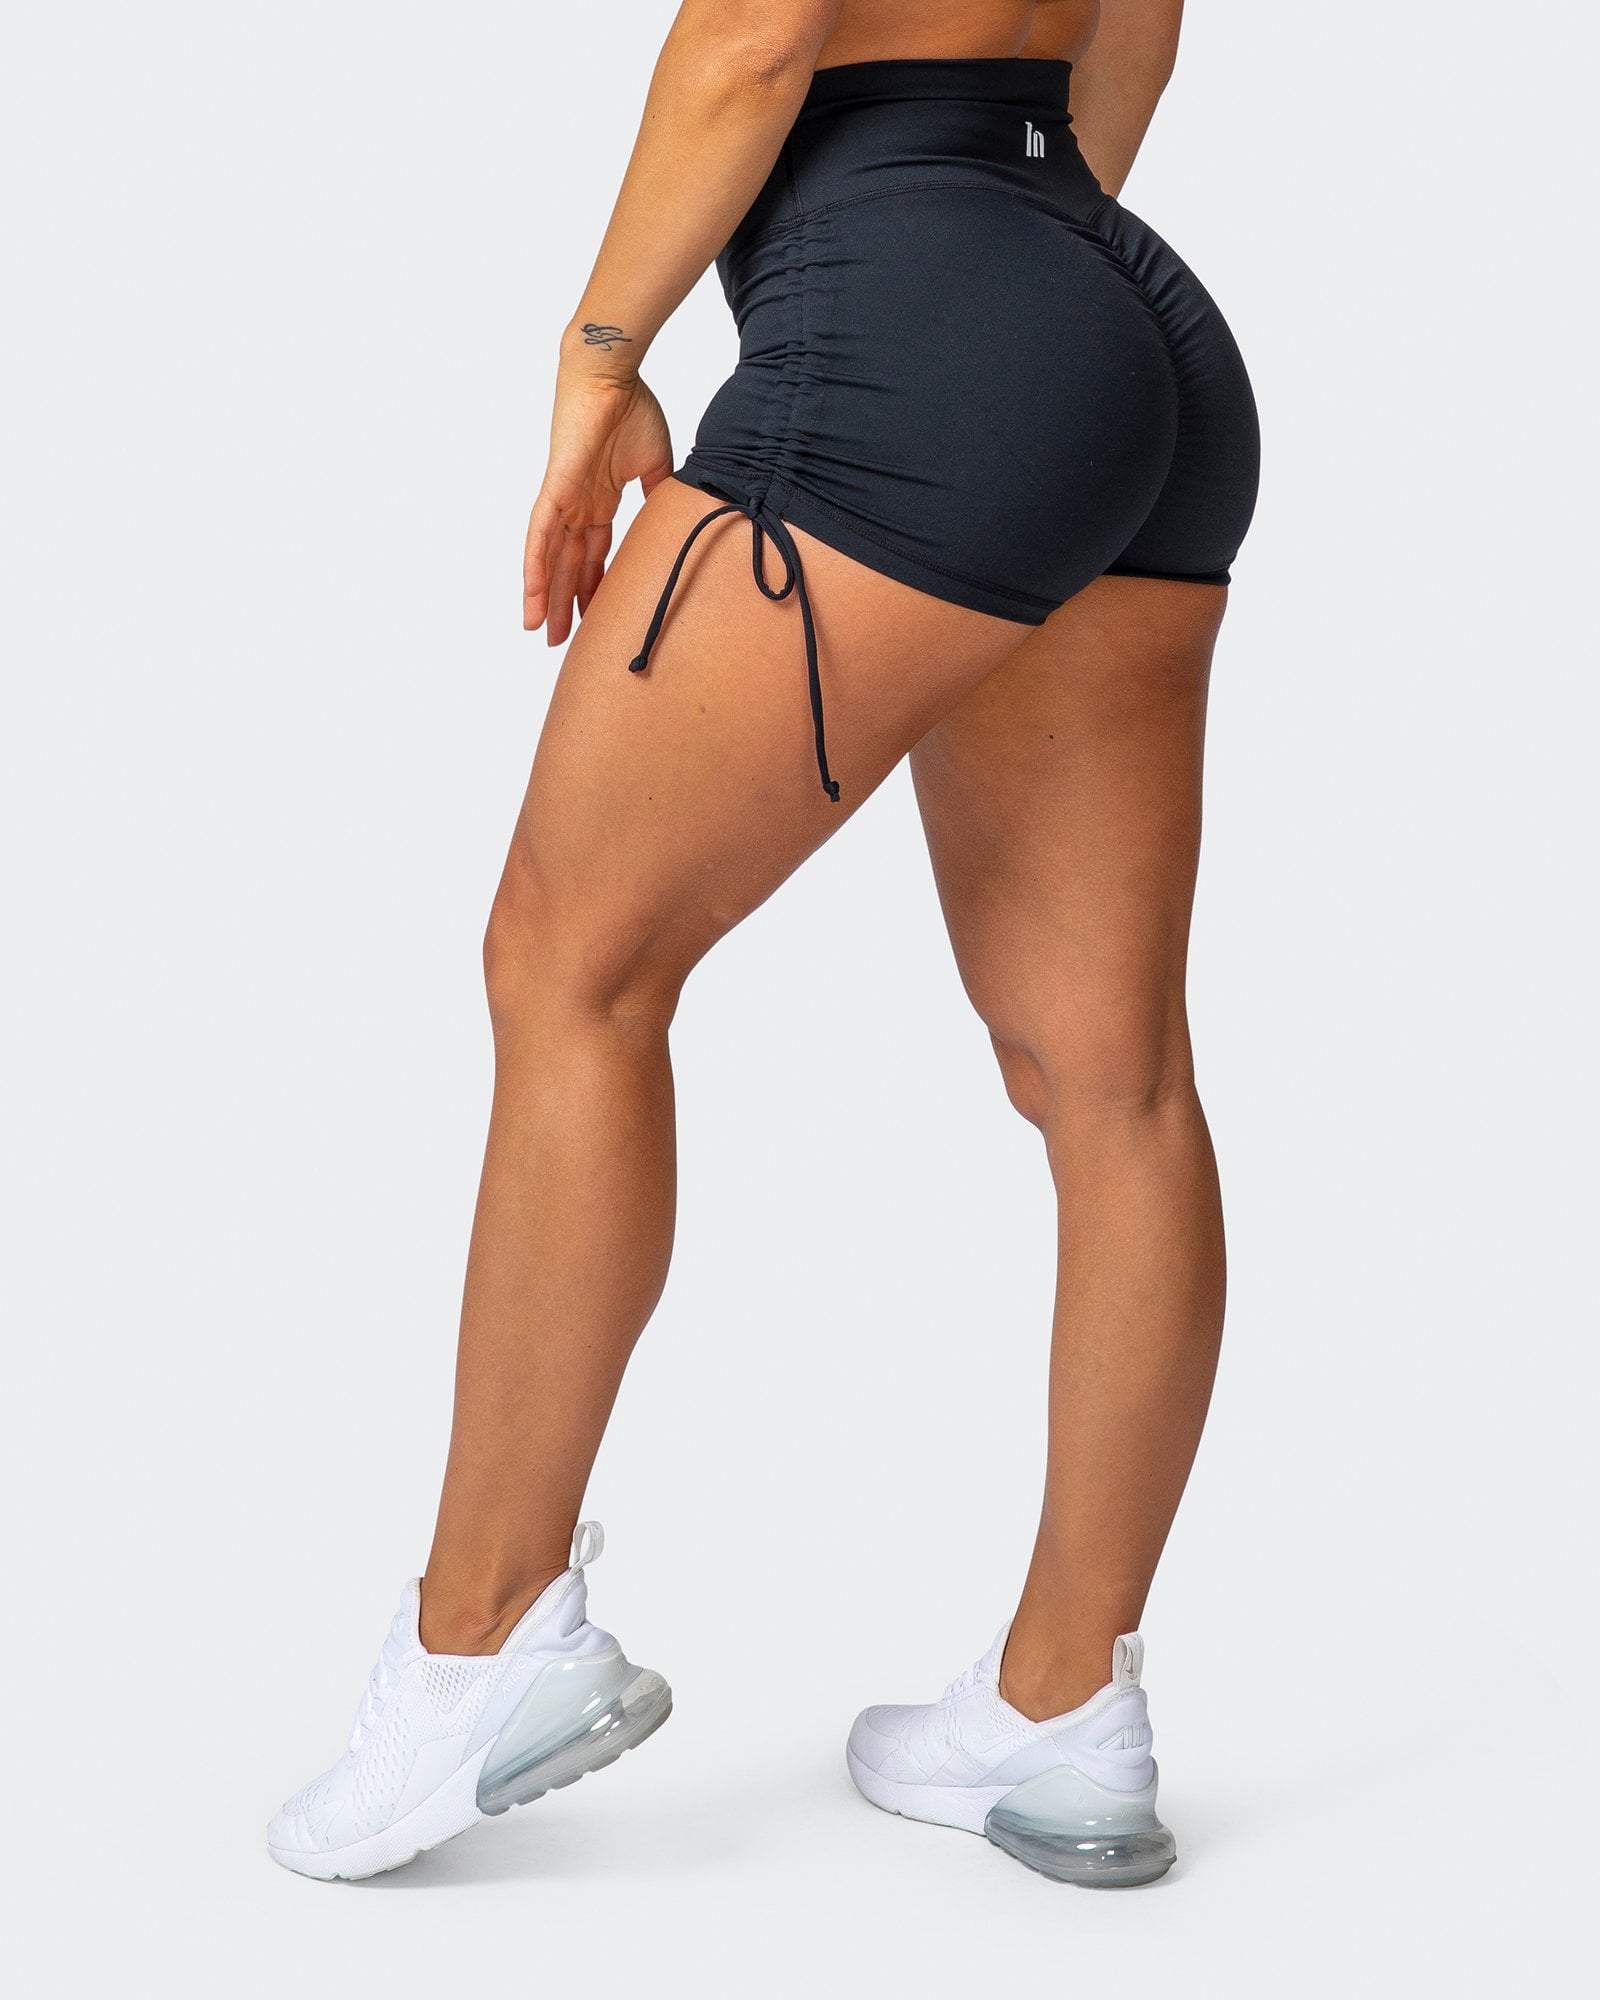 musclenation SIGNATURE SCRUNCH TIE UP BOOTY SHORTS Black